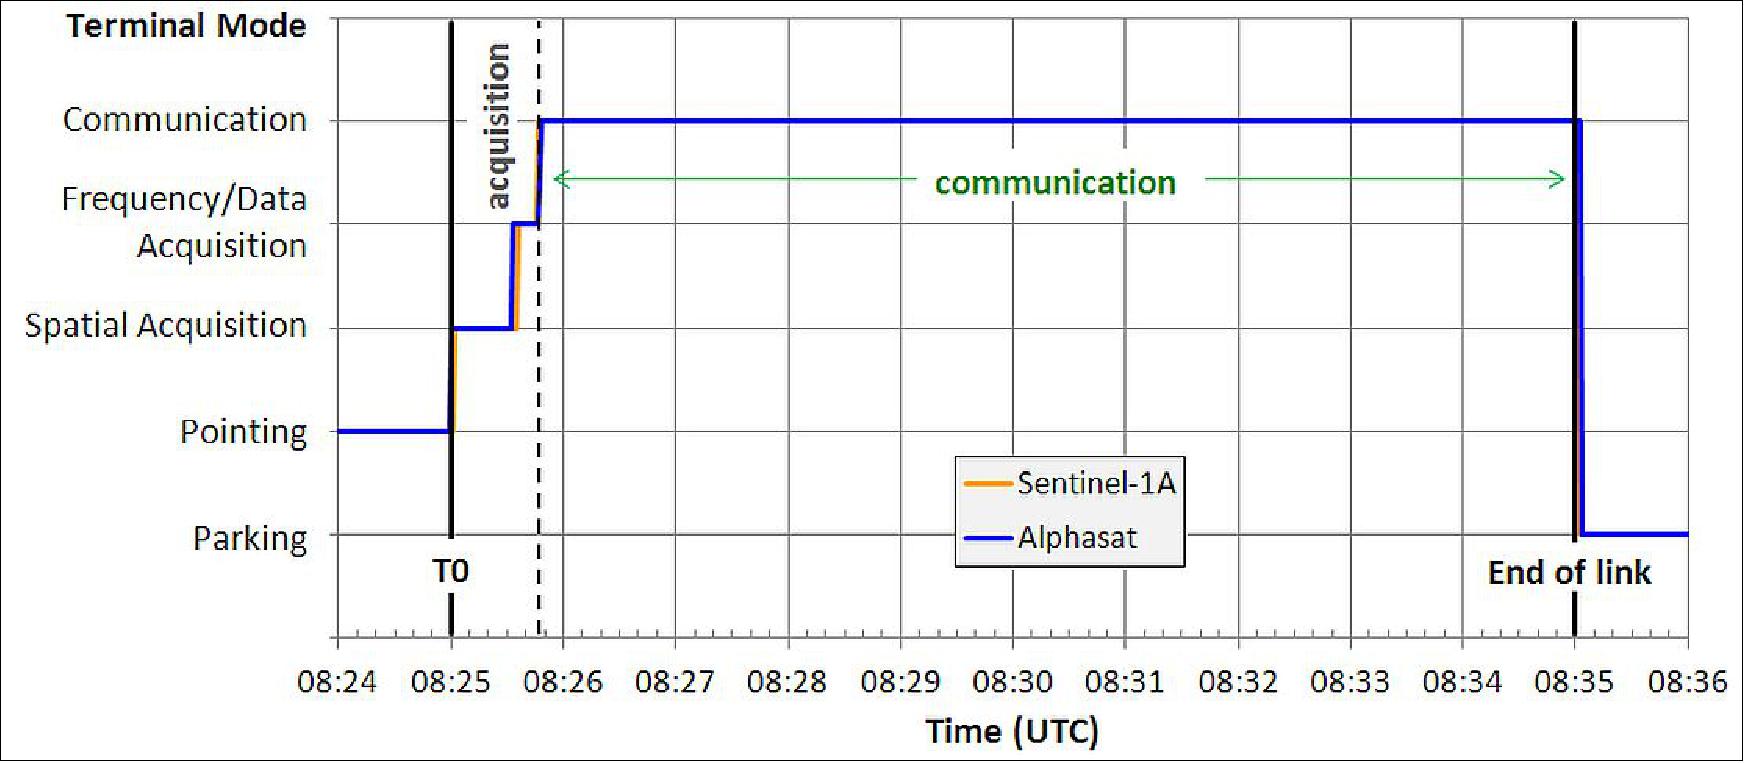 Figure 24: Schematic view of the 100th optical communication session (image credit: Tesat Spacecom)